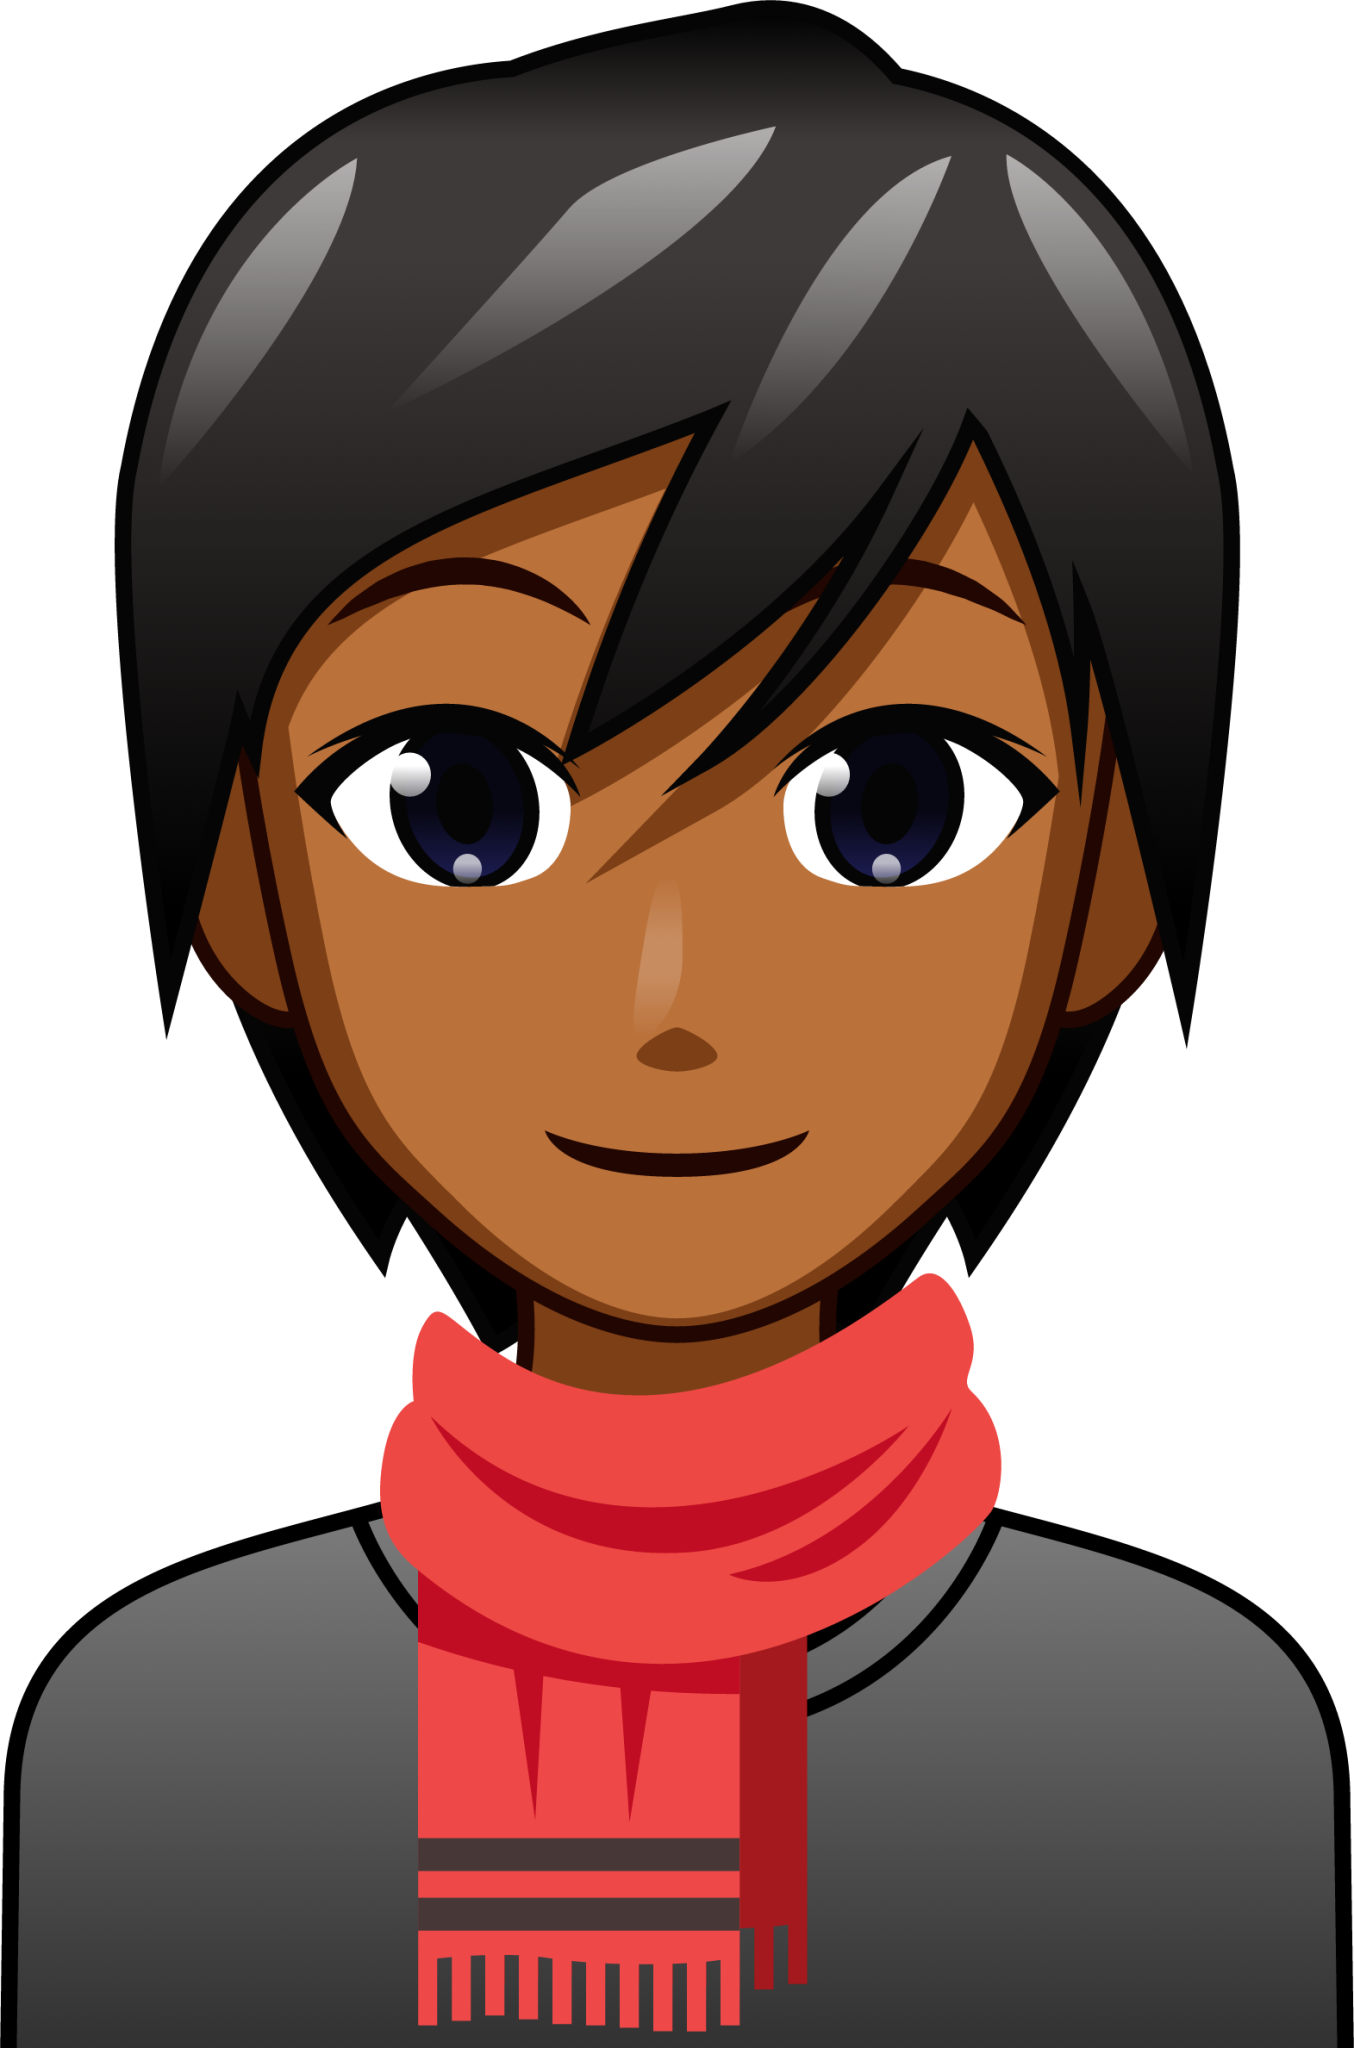 person with scarf (brown) emoji